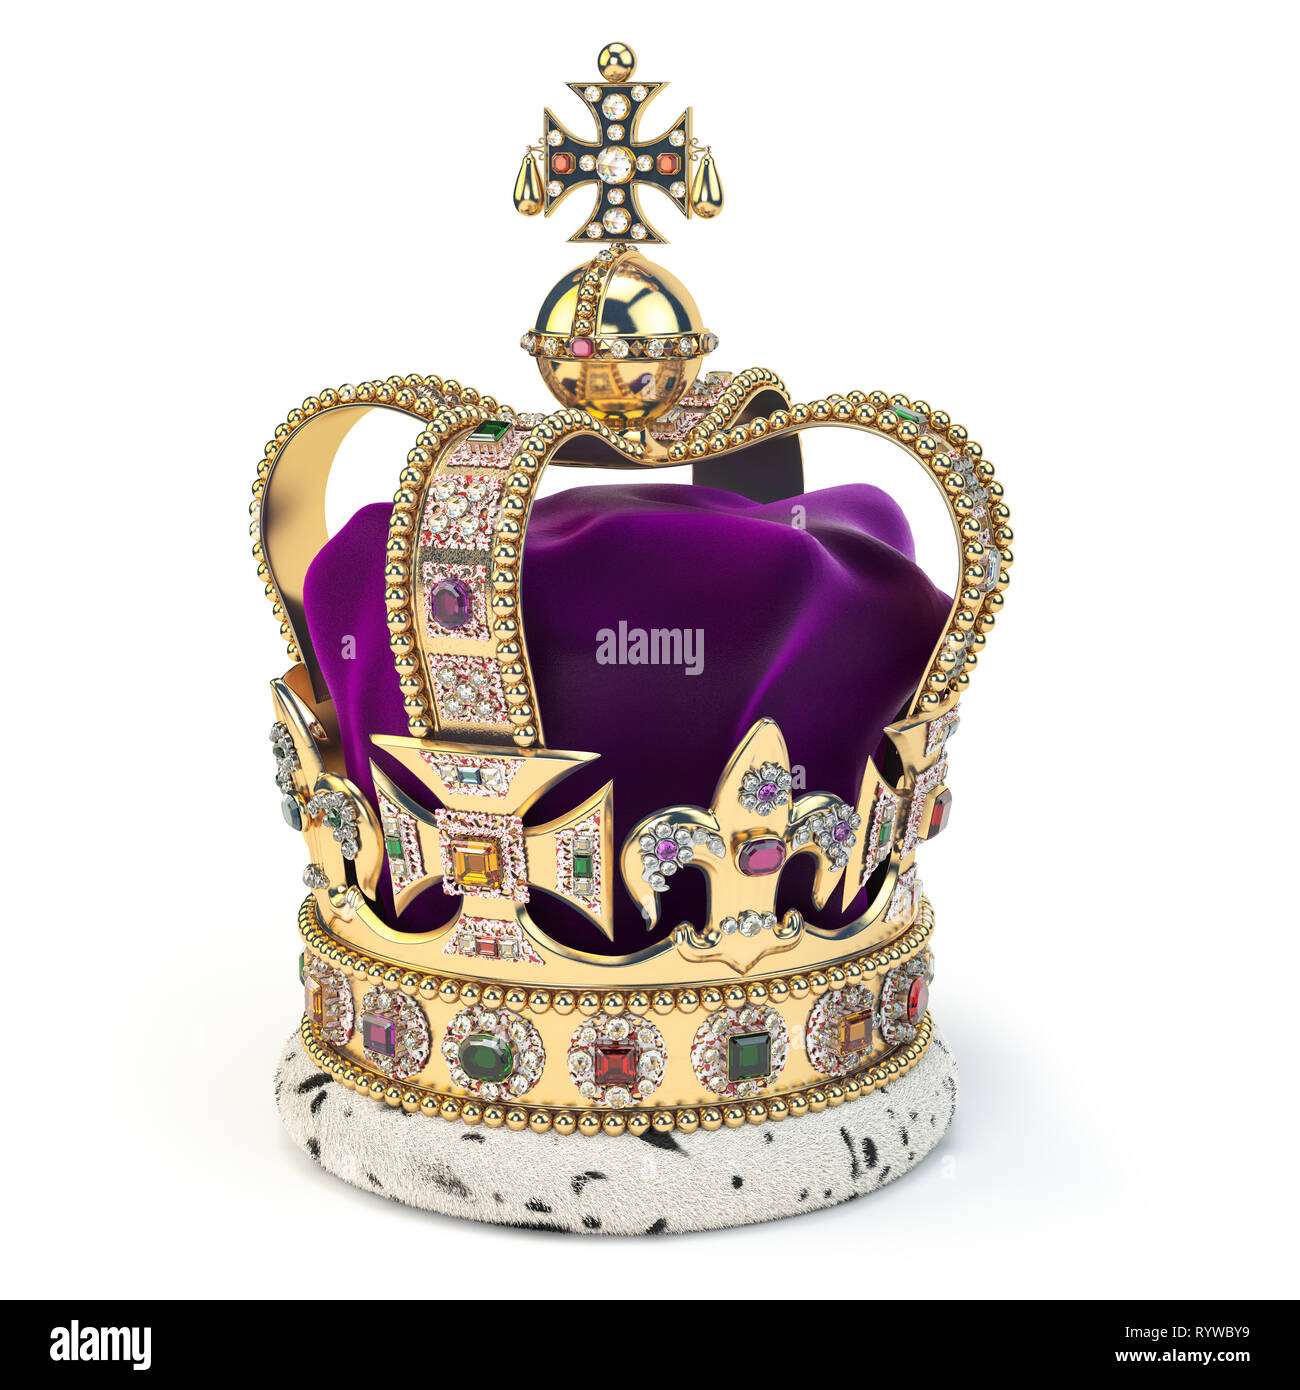 Golden crown with jewels isolated on white. English royal symbol of UK monarchy. 3d illustration Stock Photo